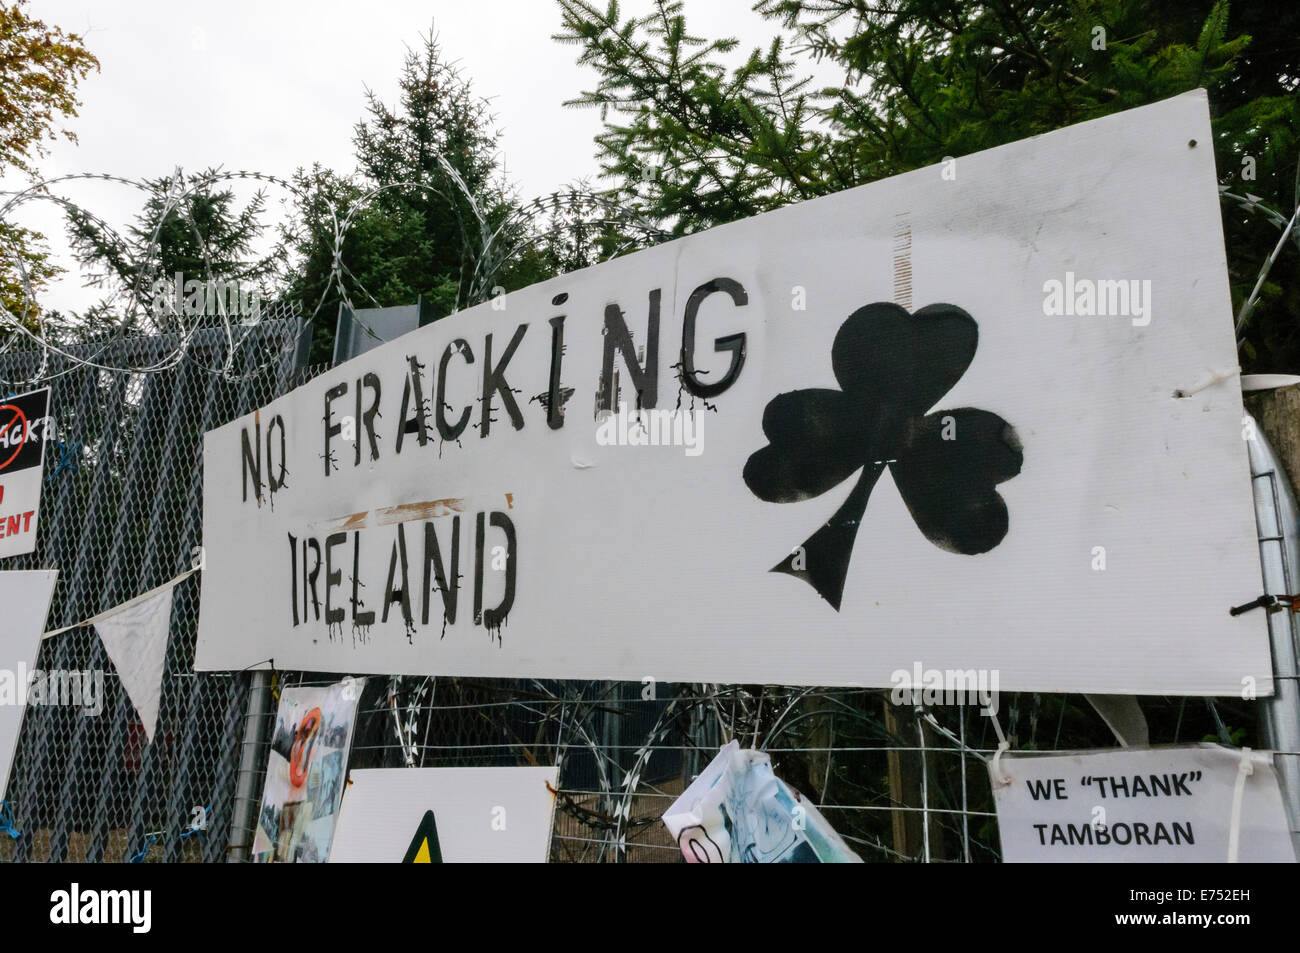 Belcoo, Northern Ireland. 2nd September 2014 - Anti-Fracking campaign at quarry owned by Tamboran Stock Photo